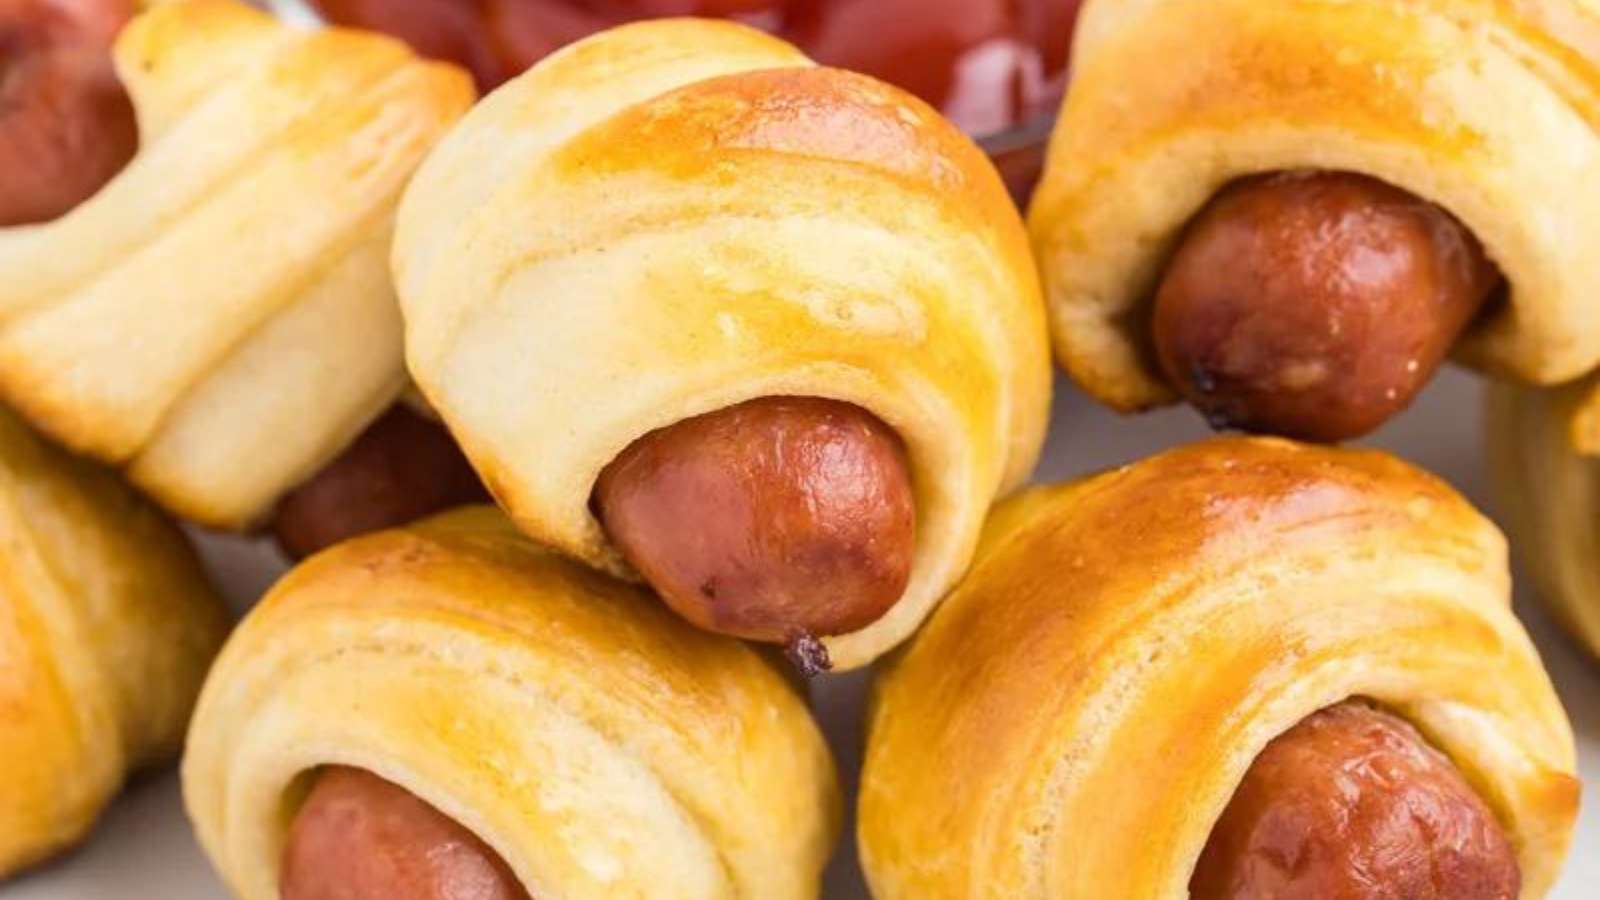 Hot dogs wrapped in pastry with ketchup on a plate.